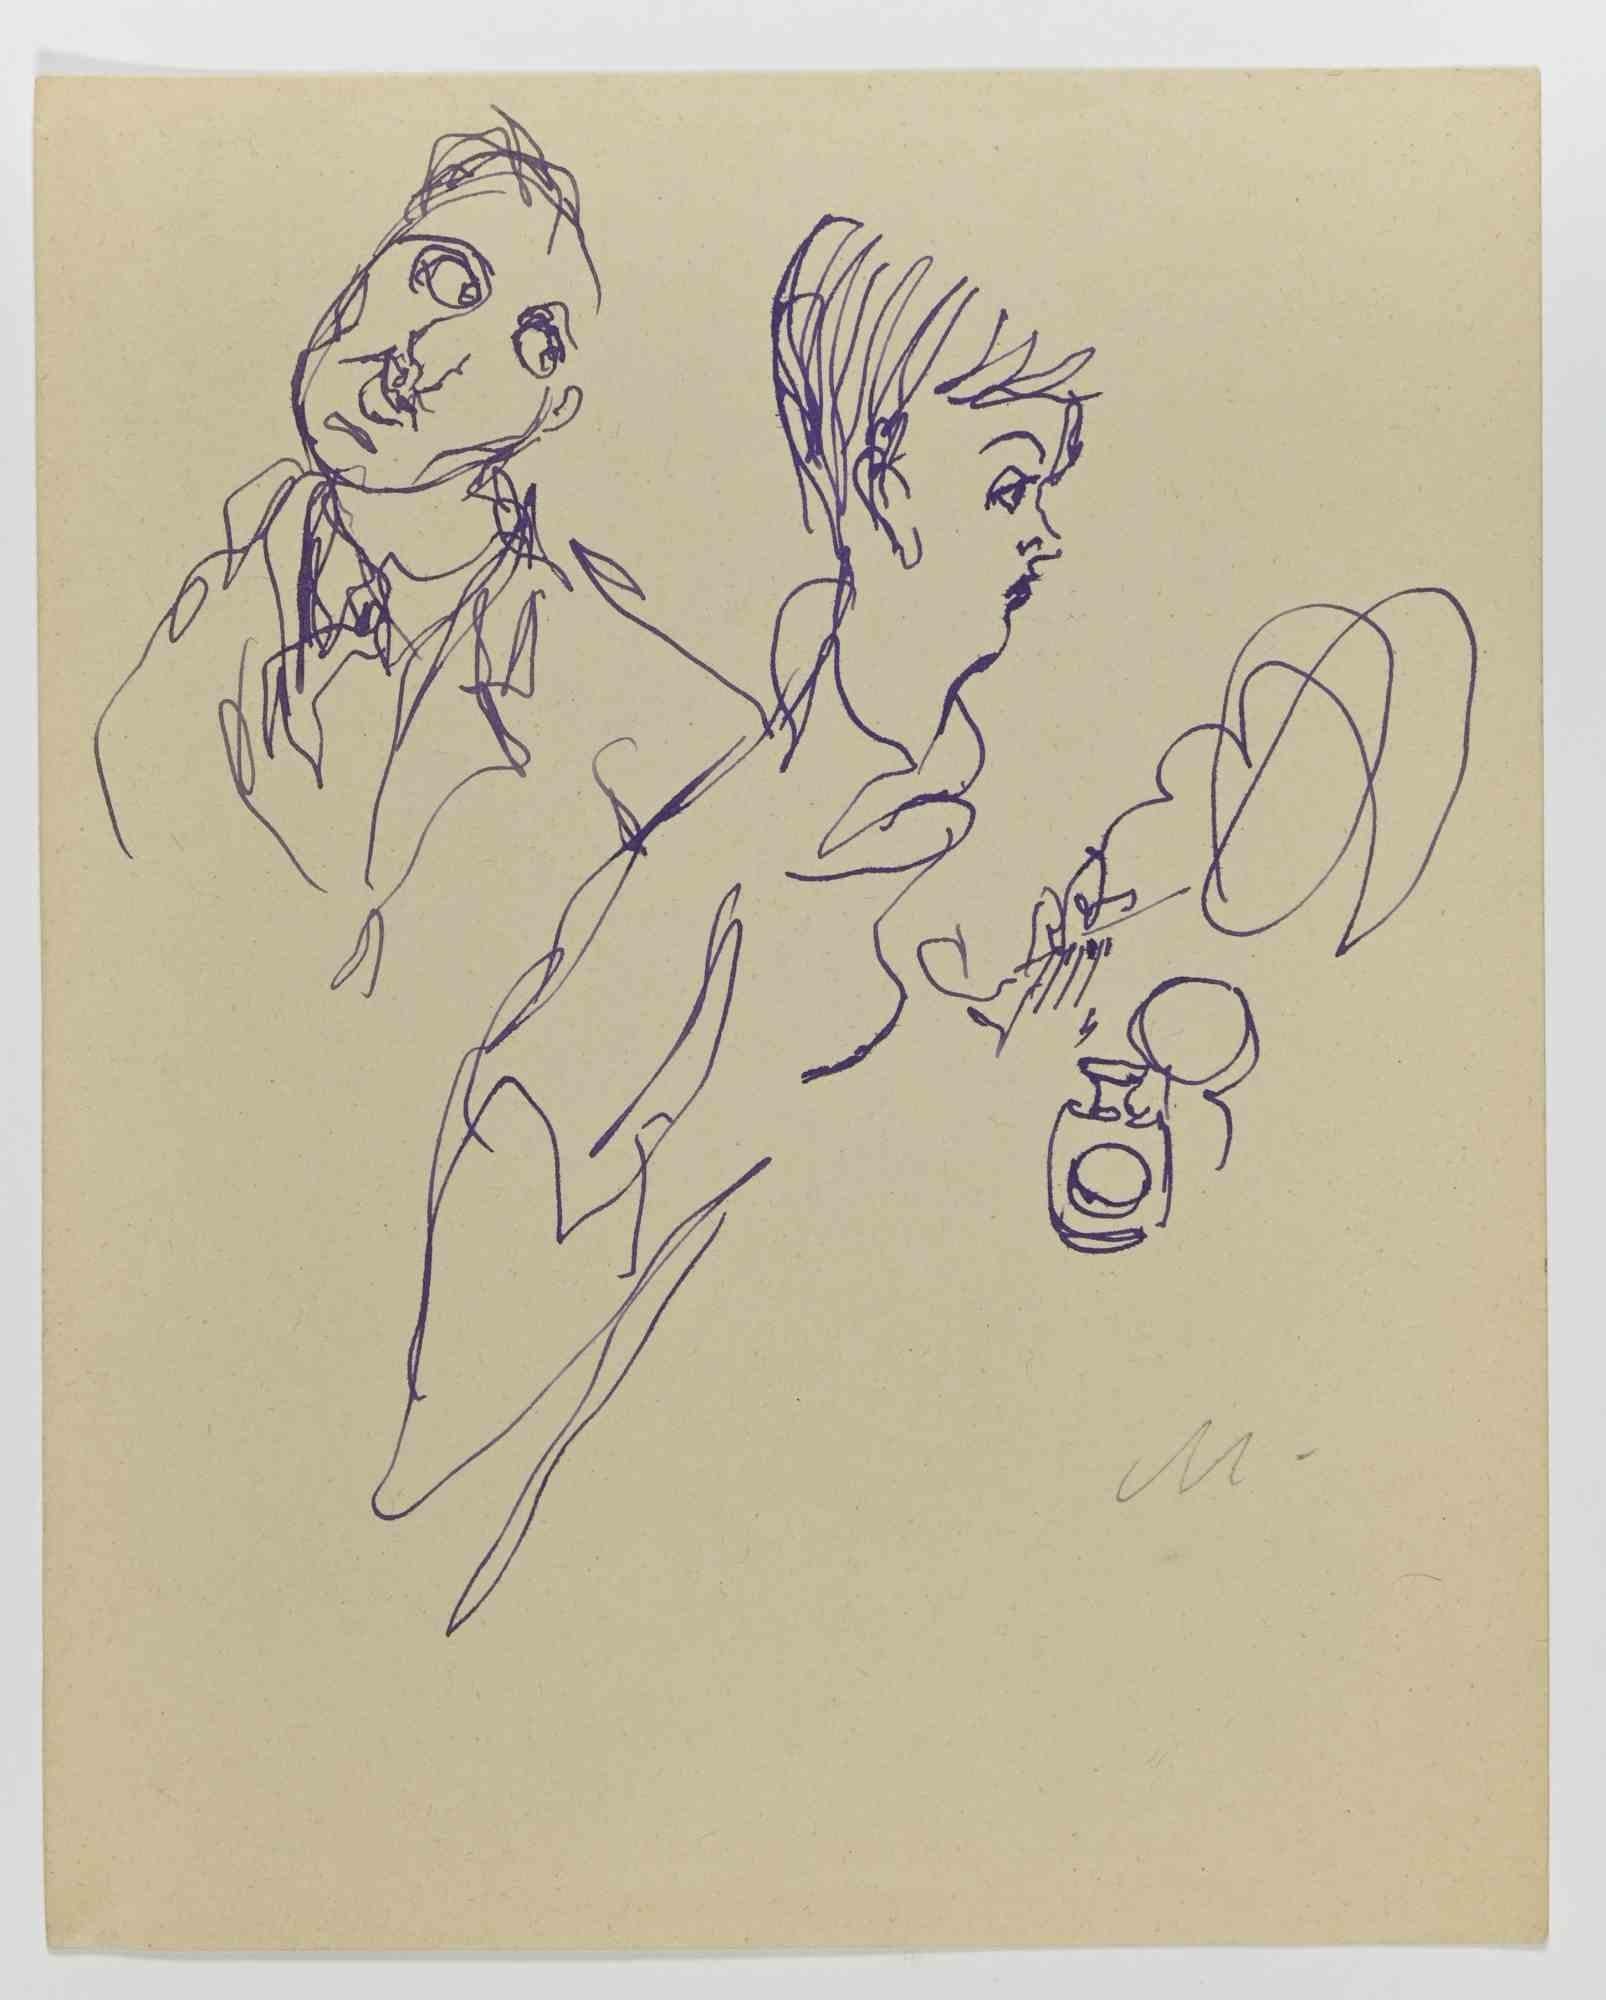 The Couple - Drawing by Mino Maccari - 1940s